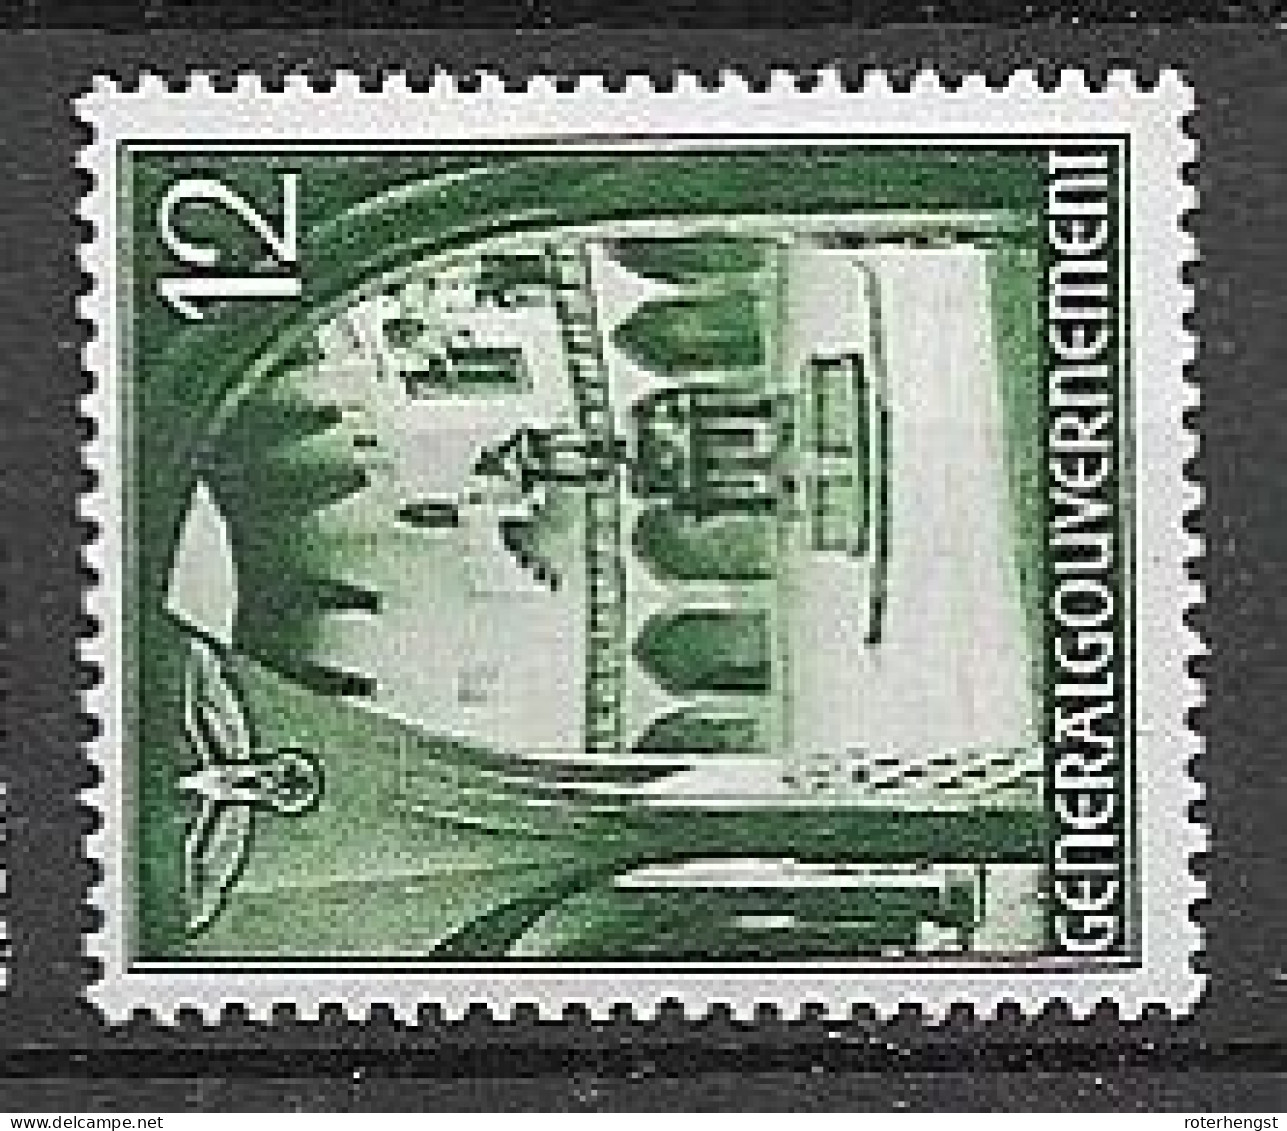 Generalgouvernement Mh * 1940 Best From Set - Bezetting 1938-45